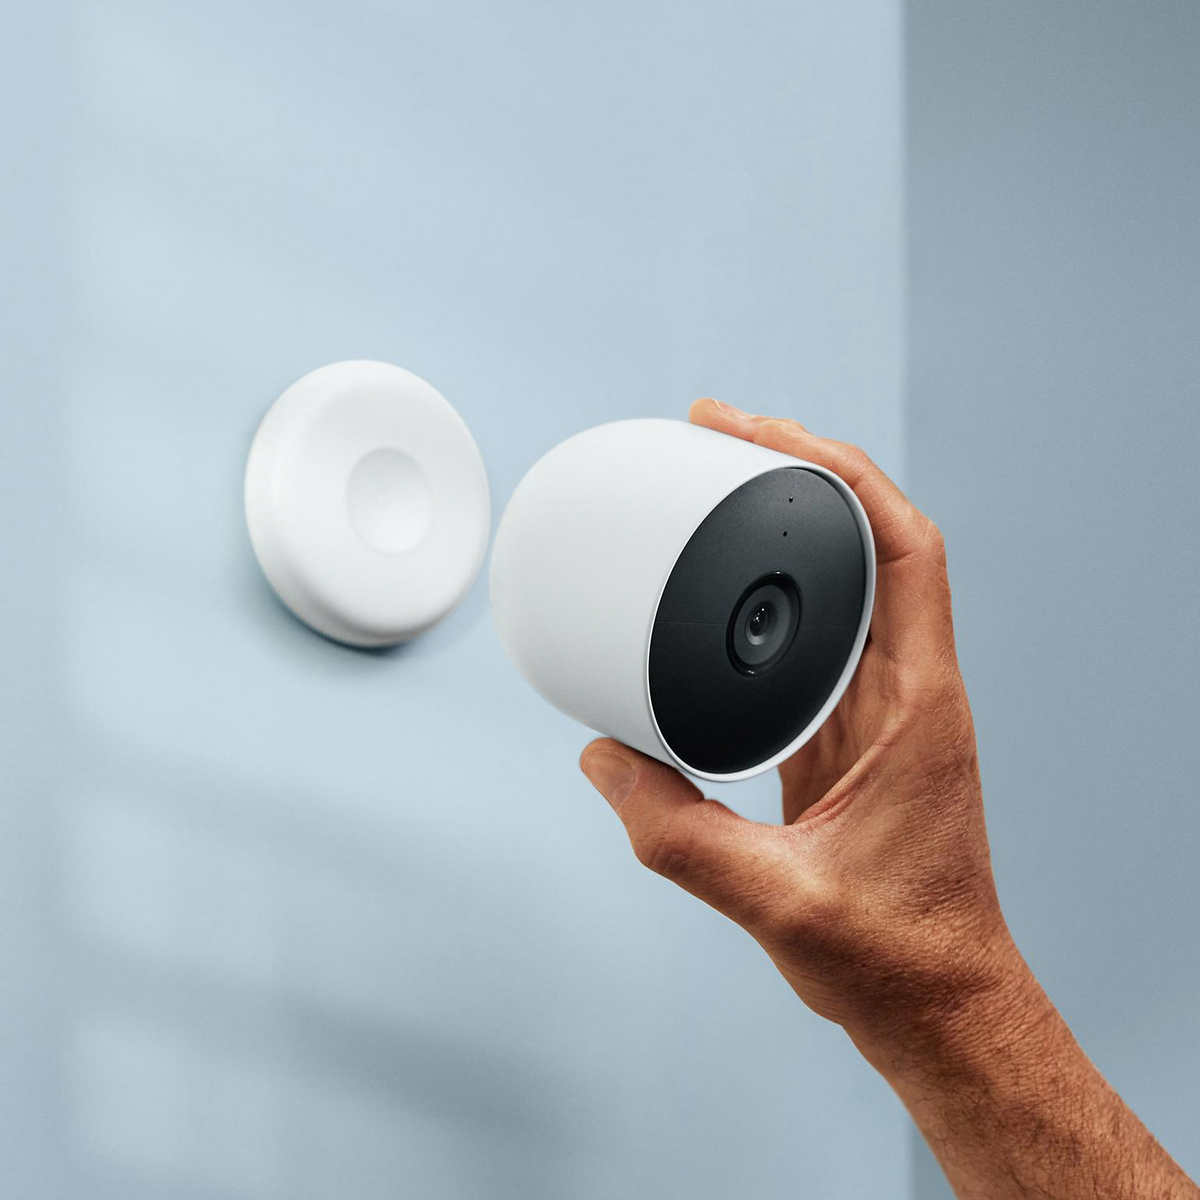 ADT Pro-Installed 13-piece Smart Home Security System with Nest Cameras